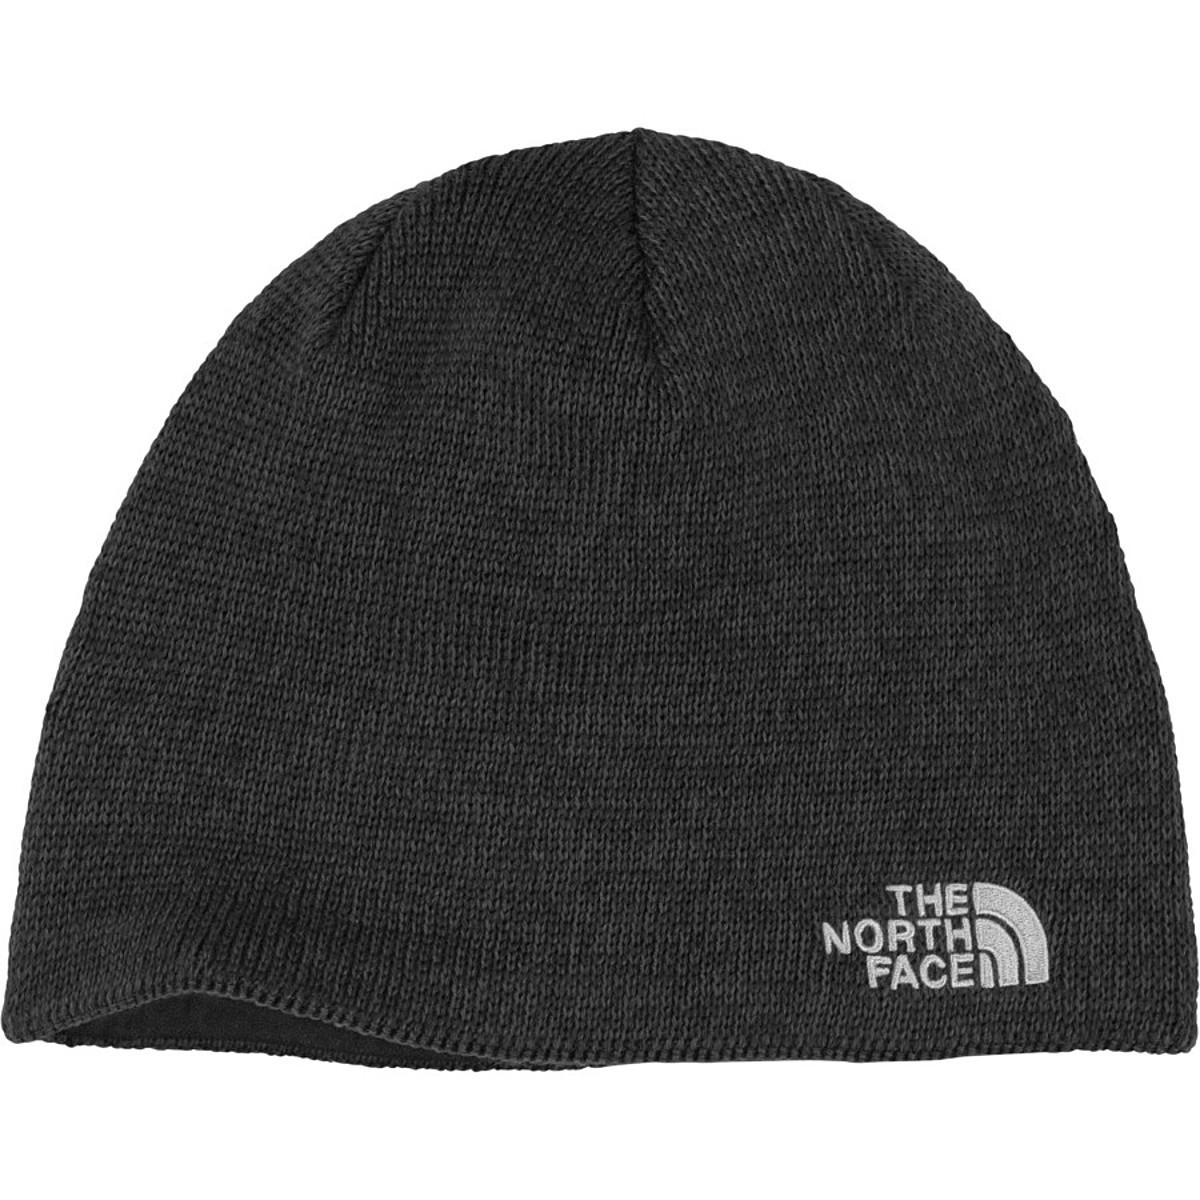 The North Face Fleece Jim Beanie in Black for Men - Lyst